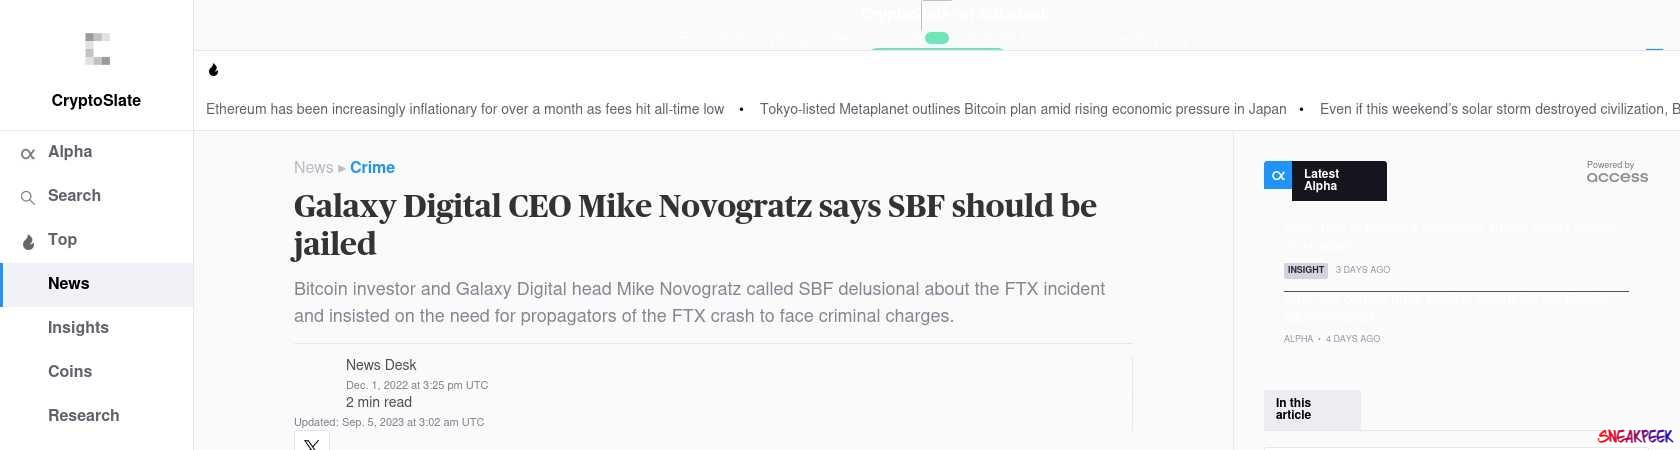 Read the full Article:  ⭲ Galaxy Digital CEO Mike Novogratz says SBF should be jailed